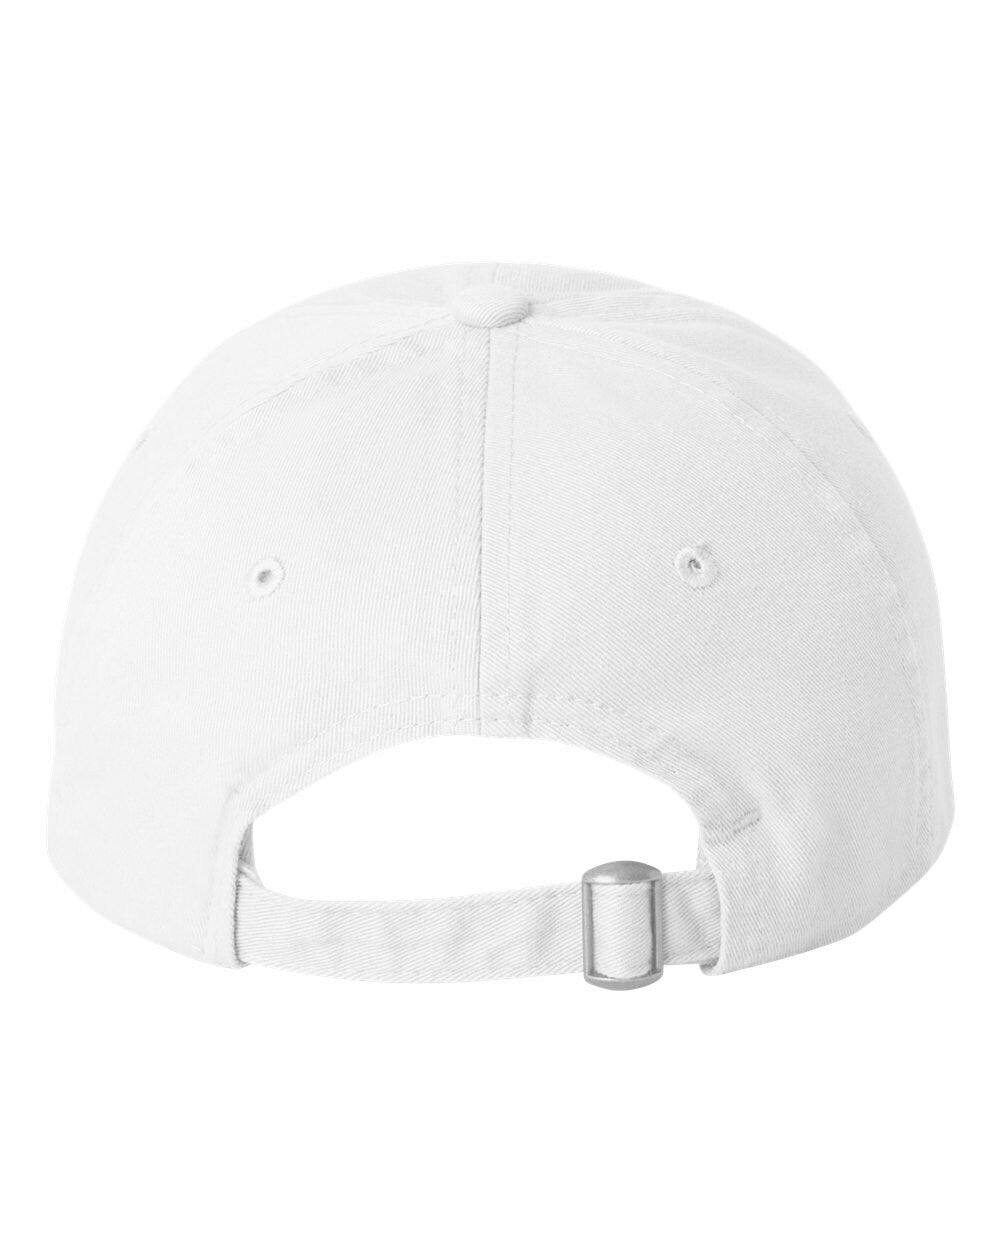 Youth/Small Boho Heart Dad Hat | minimalist Embroidered White Baseball Cap | Valentine's Day